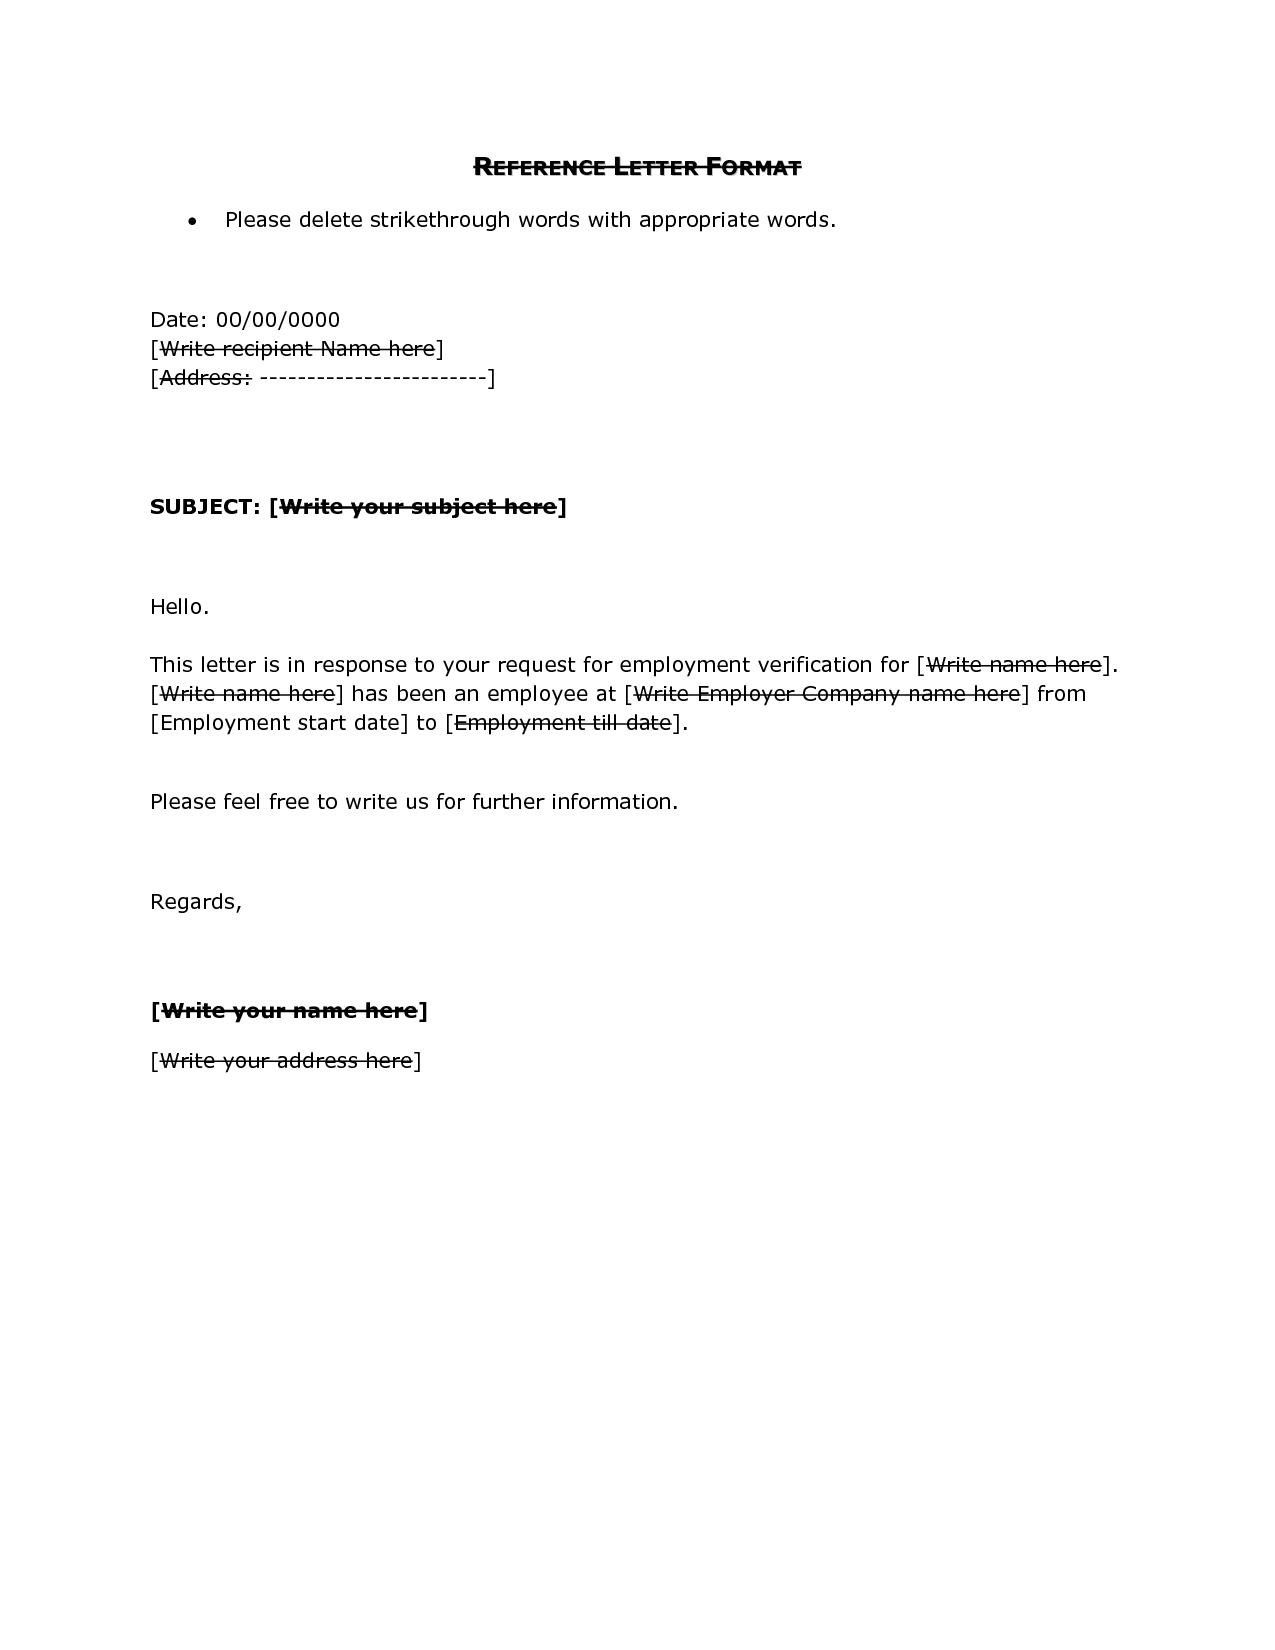 Simple Reference Letter Format Debandje in sizing 1275 X 1650